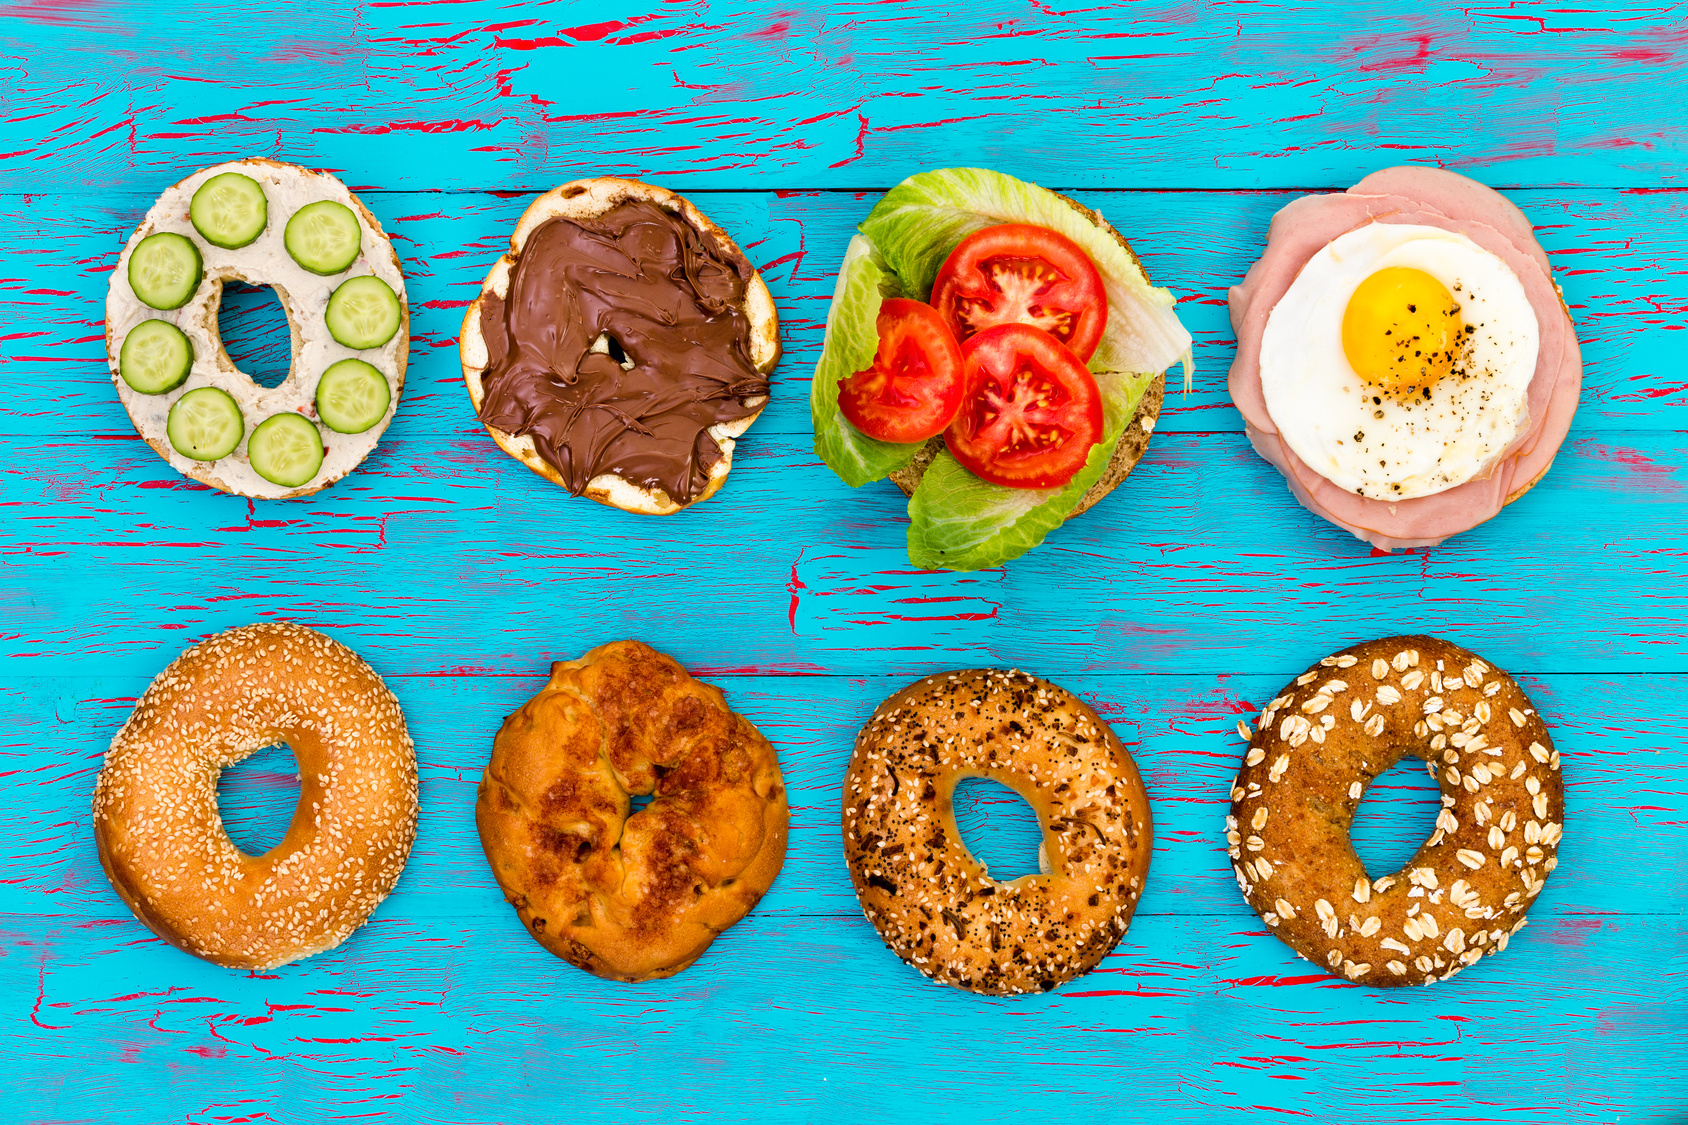 Four different flavored fresh sliced bagels with assorted filling of cucumbers, chocolate , salad, fried egg and ham, neatly arranged in a row on an exotic blue picnic table viewed from above